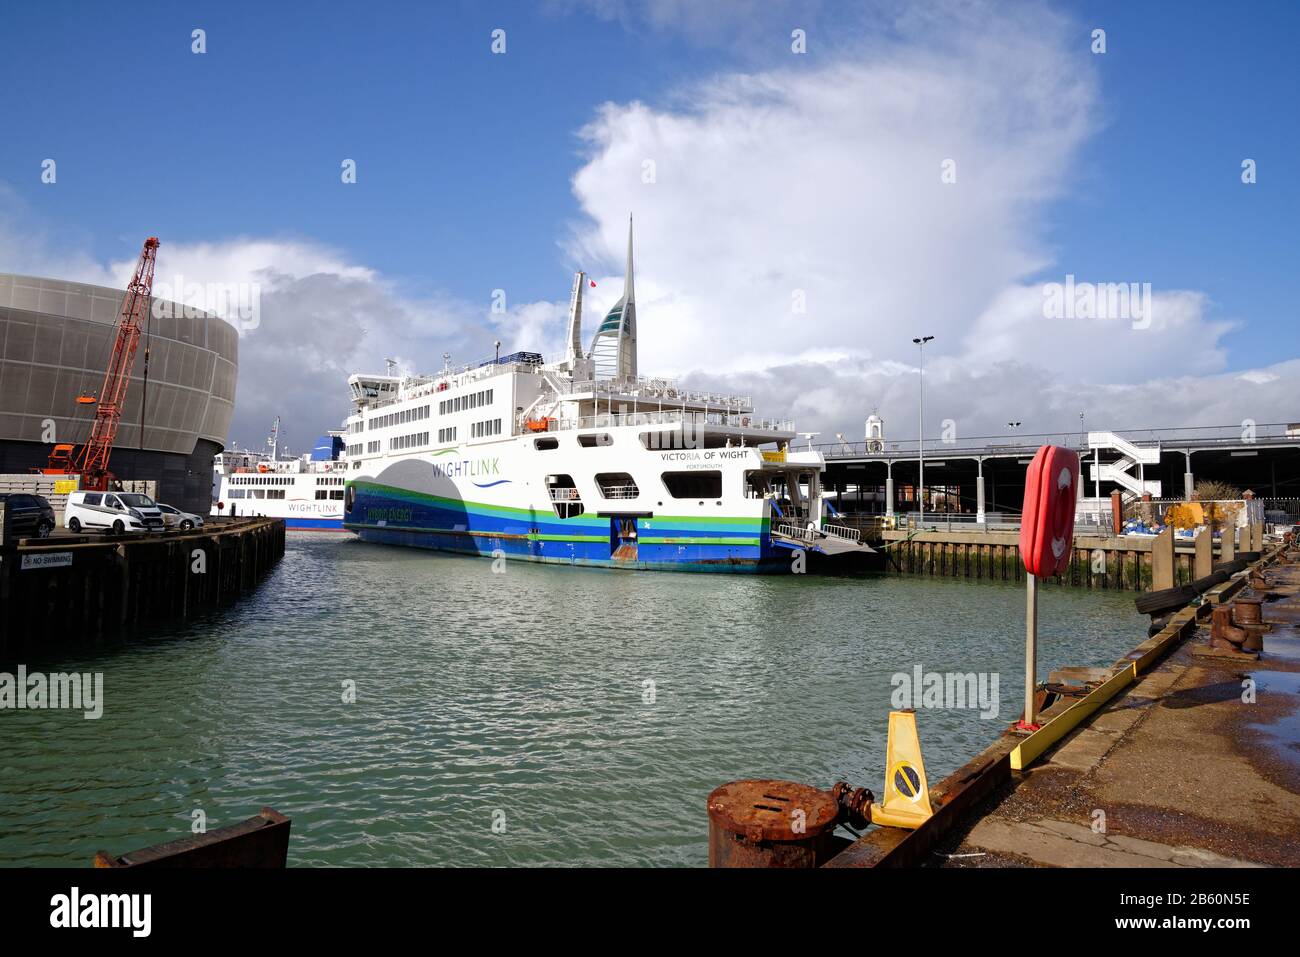 The historic Camber harbour in old Portsmouth with two Wightlink car ferries at their moorings, Portsmouth Hampshire England UK Stock Photo